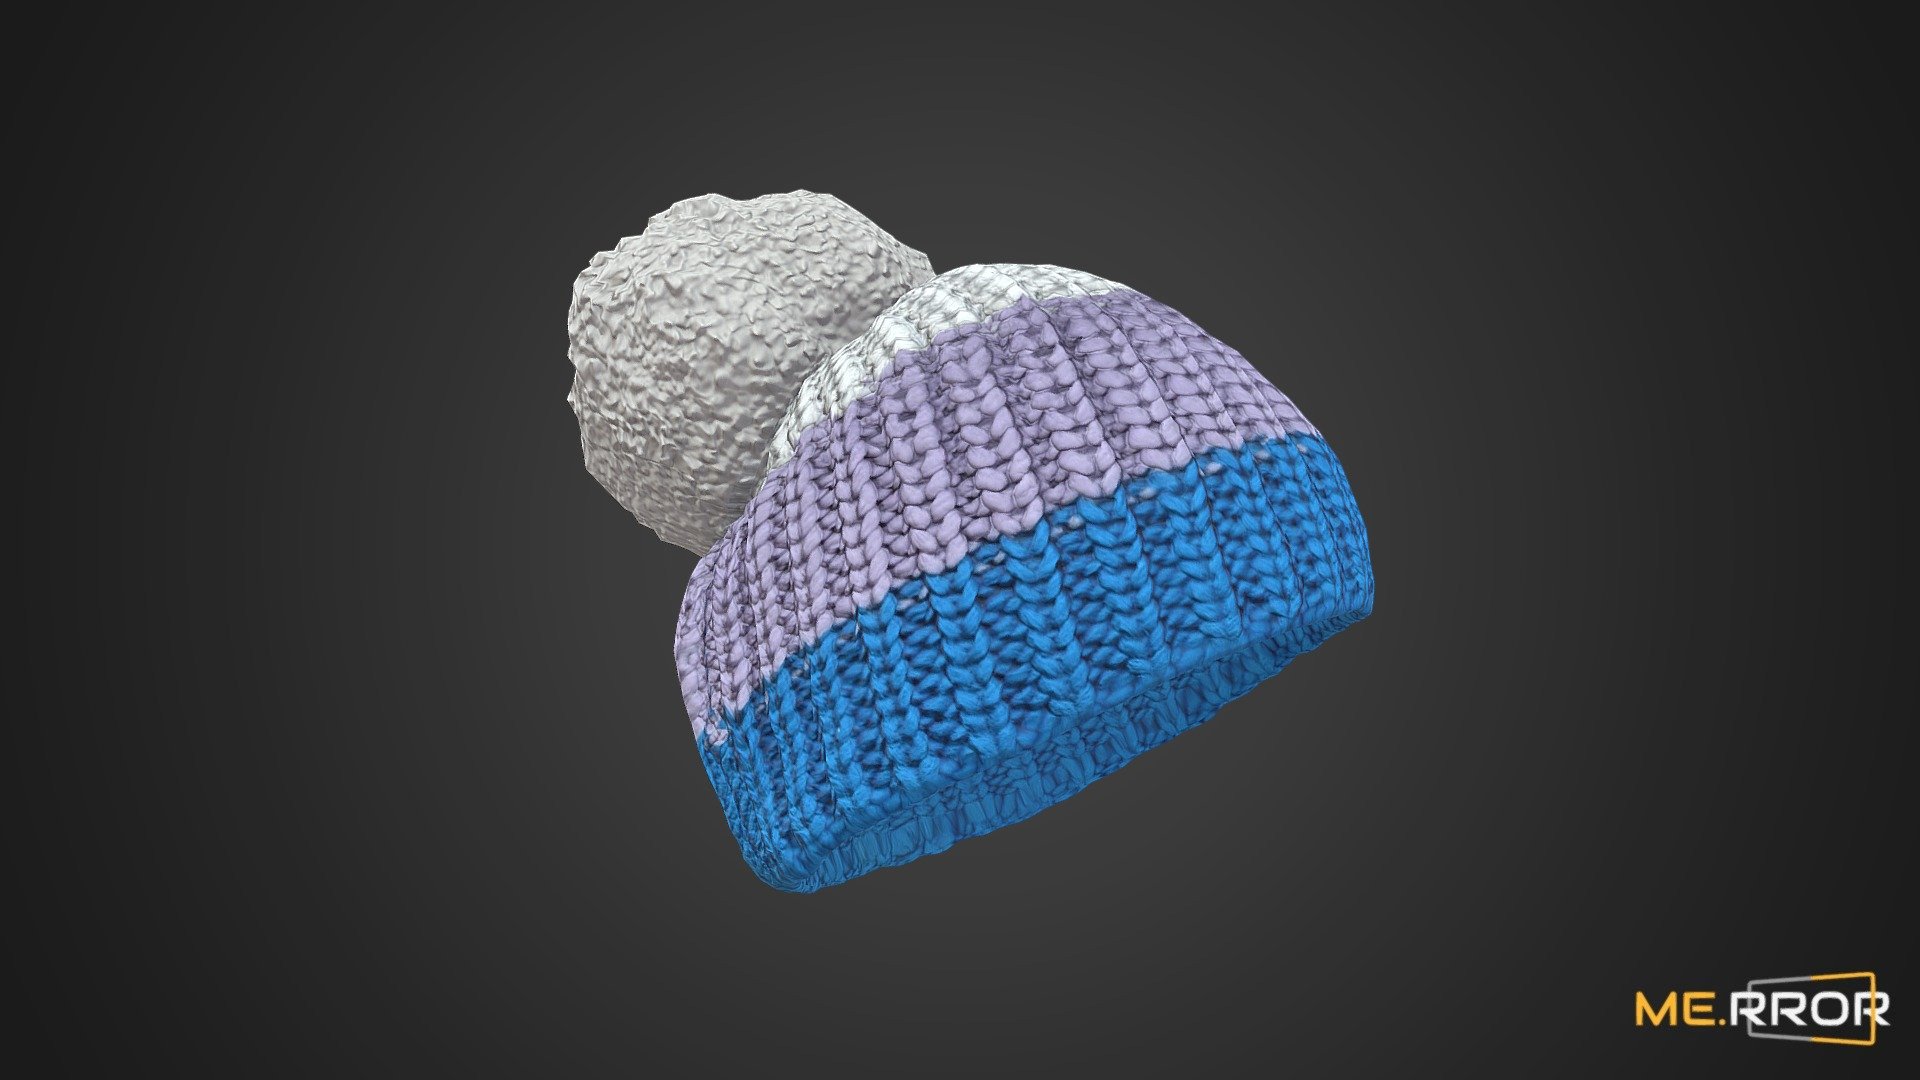 MERROR is a 3D Content PLATFORM which introduces various Asian assets to the 3D world


3DScanning #Photogrametry #ME.RROR - [Game-Ready] 3 Color Knit Hat - Buy Royalty Free 3D model by ME.RROR Studio (@merror) 3d model